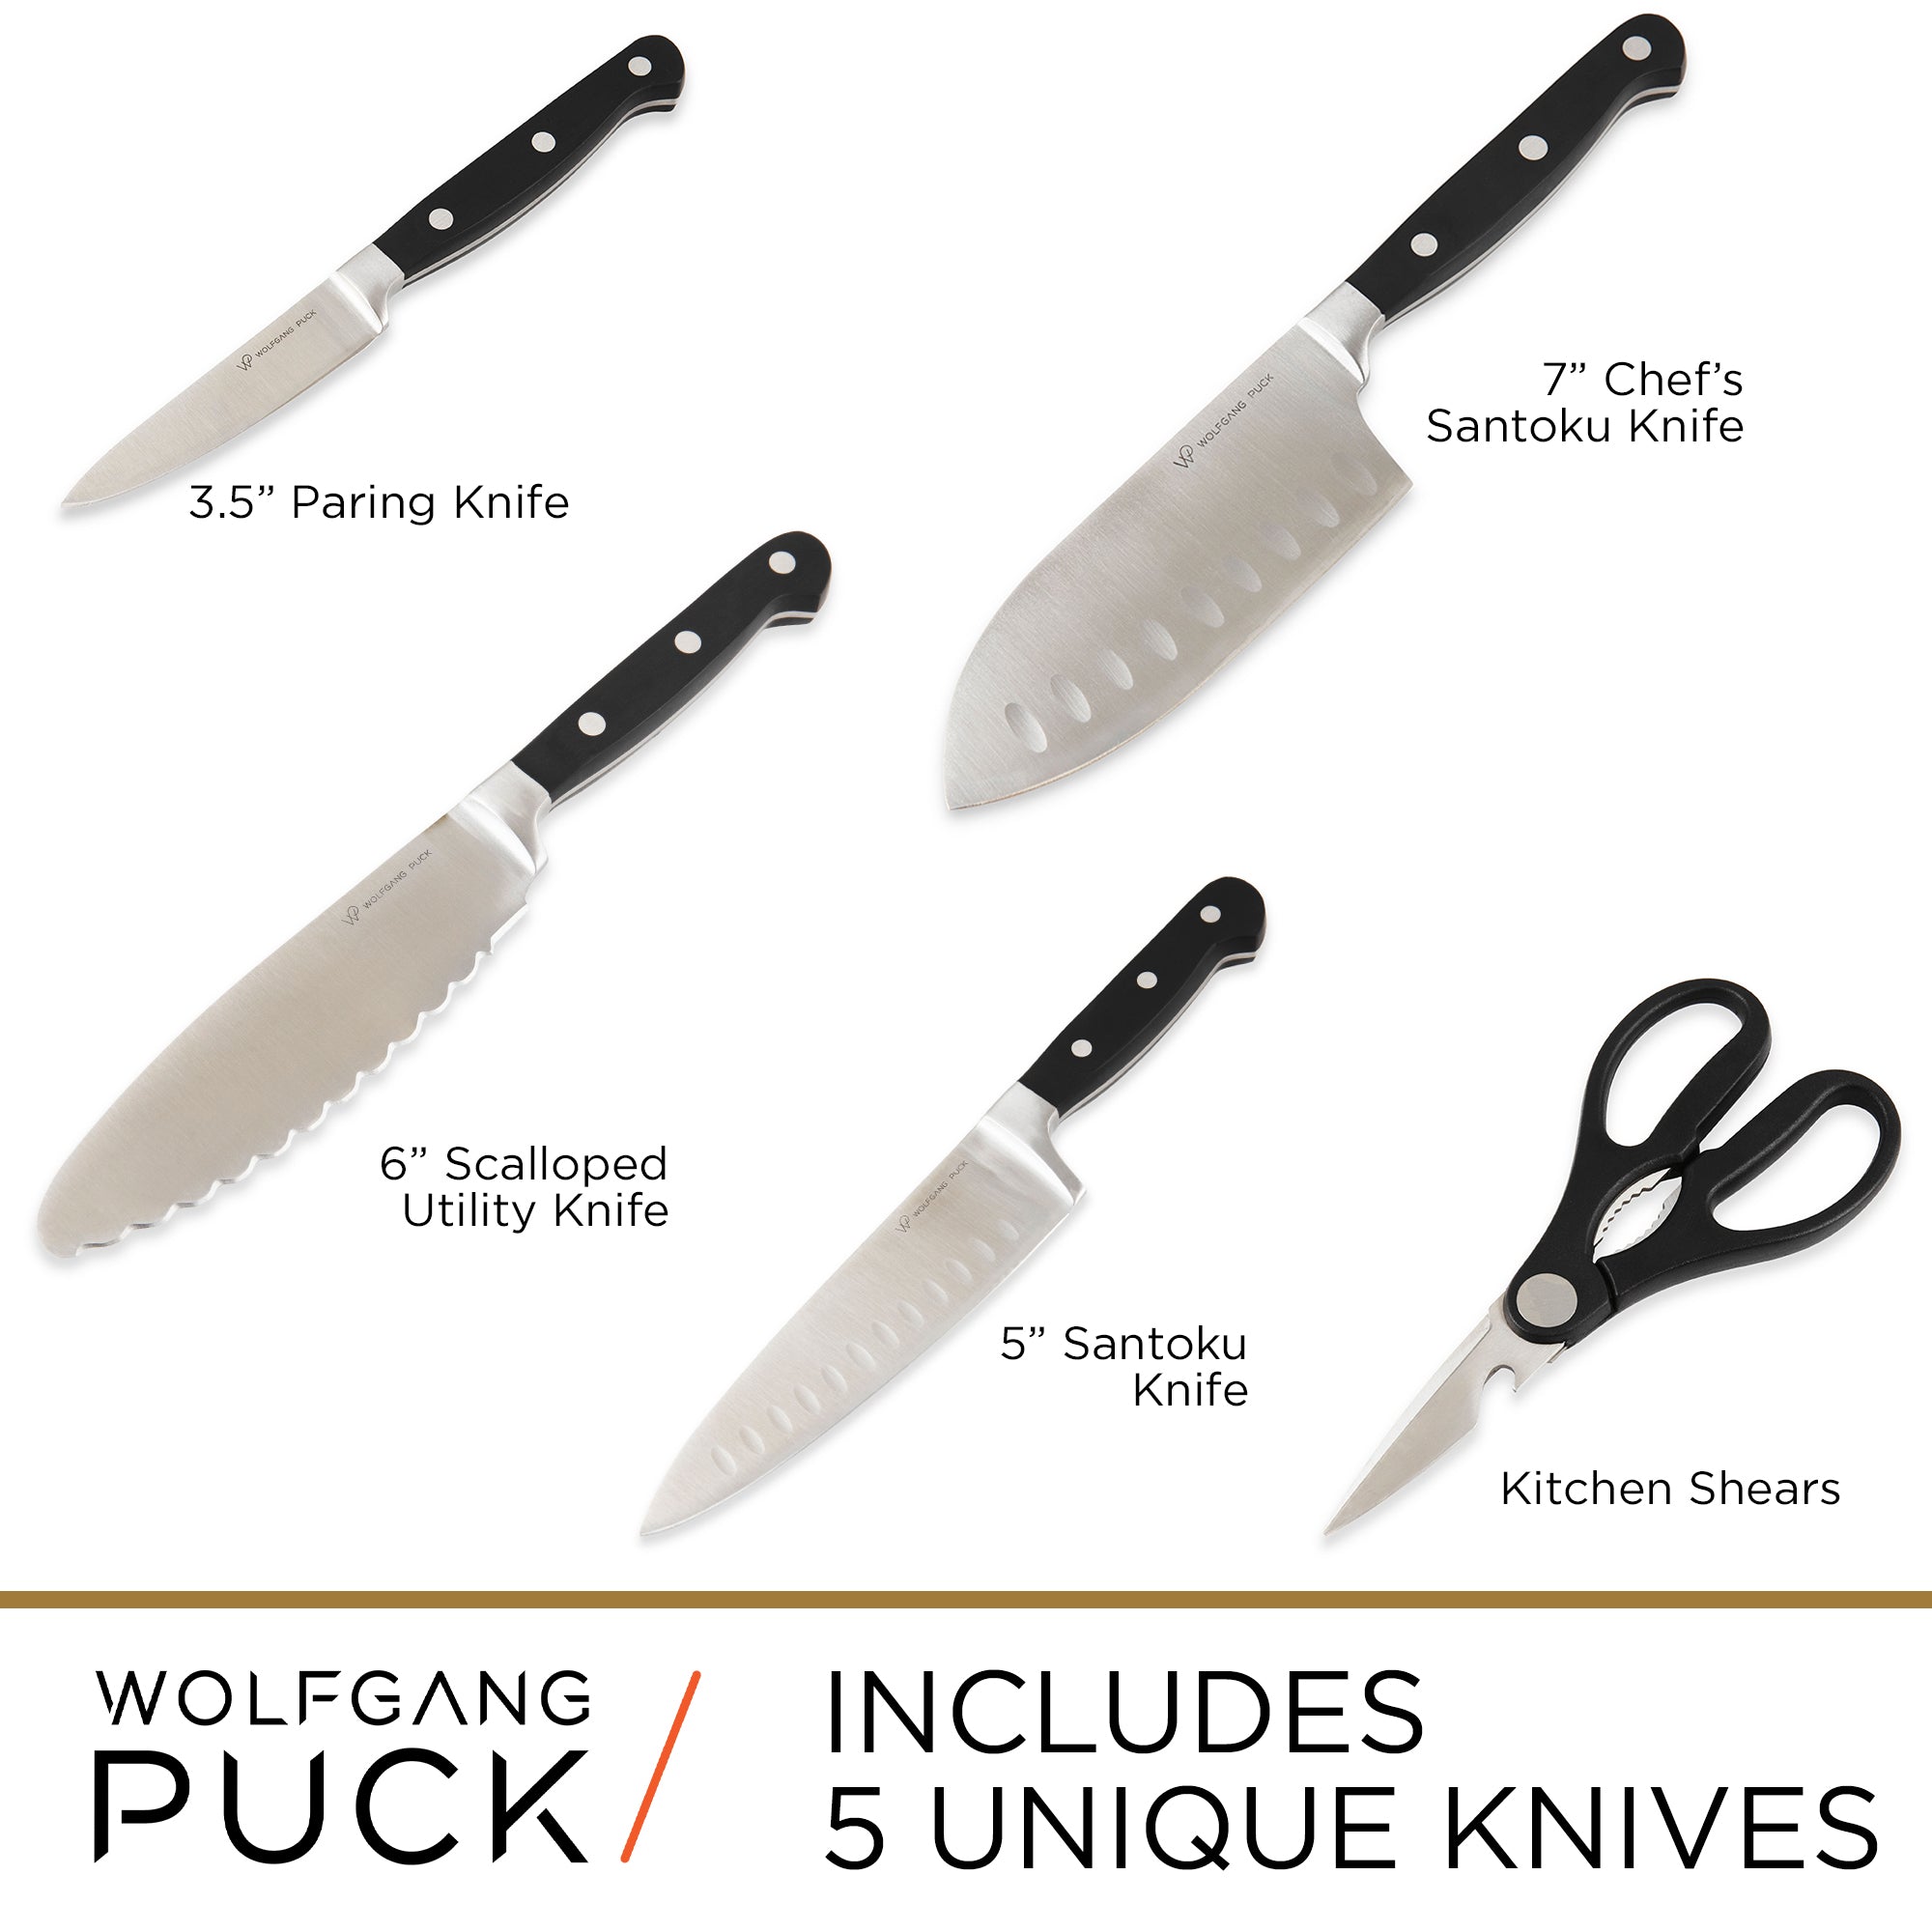 Wolfgang Puck 7 Piece Cutlery Knife Set with Wood Block includes scissors